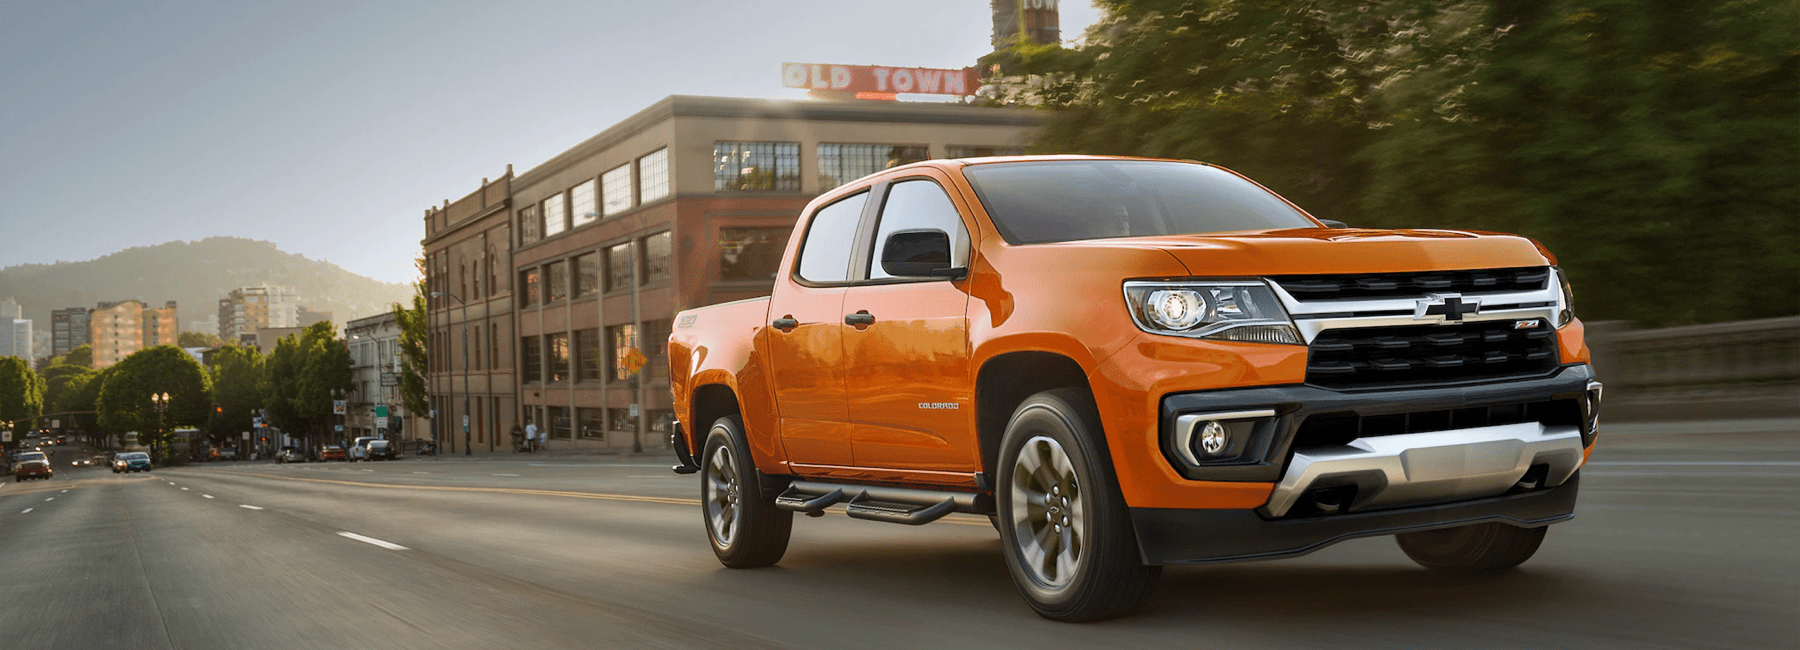 2021 Chevy Colorado drives down town road